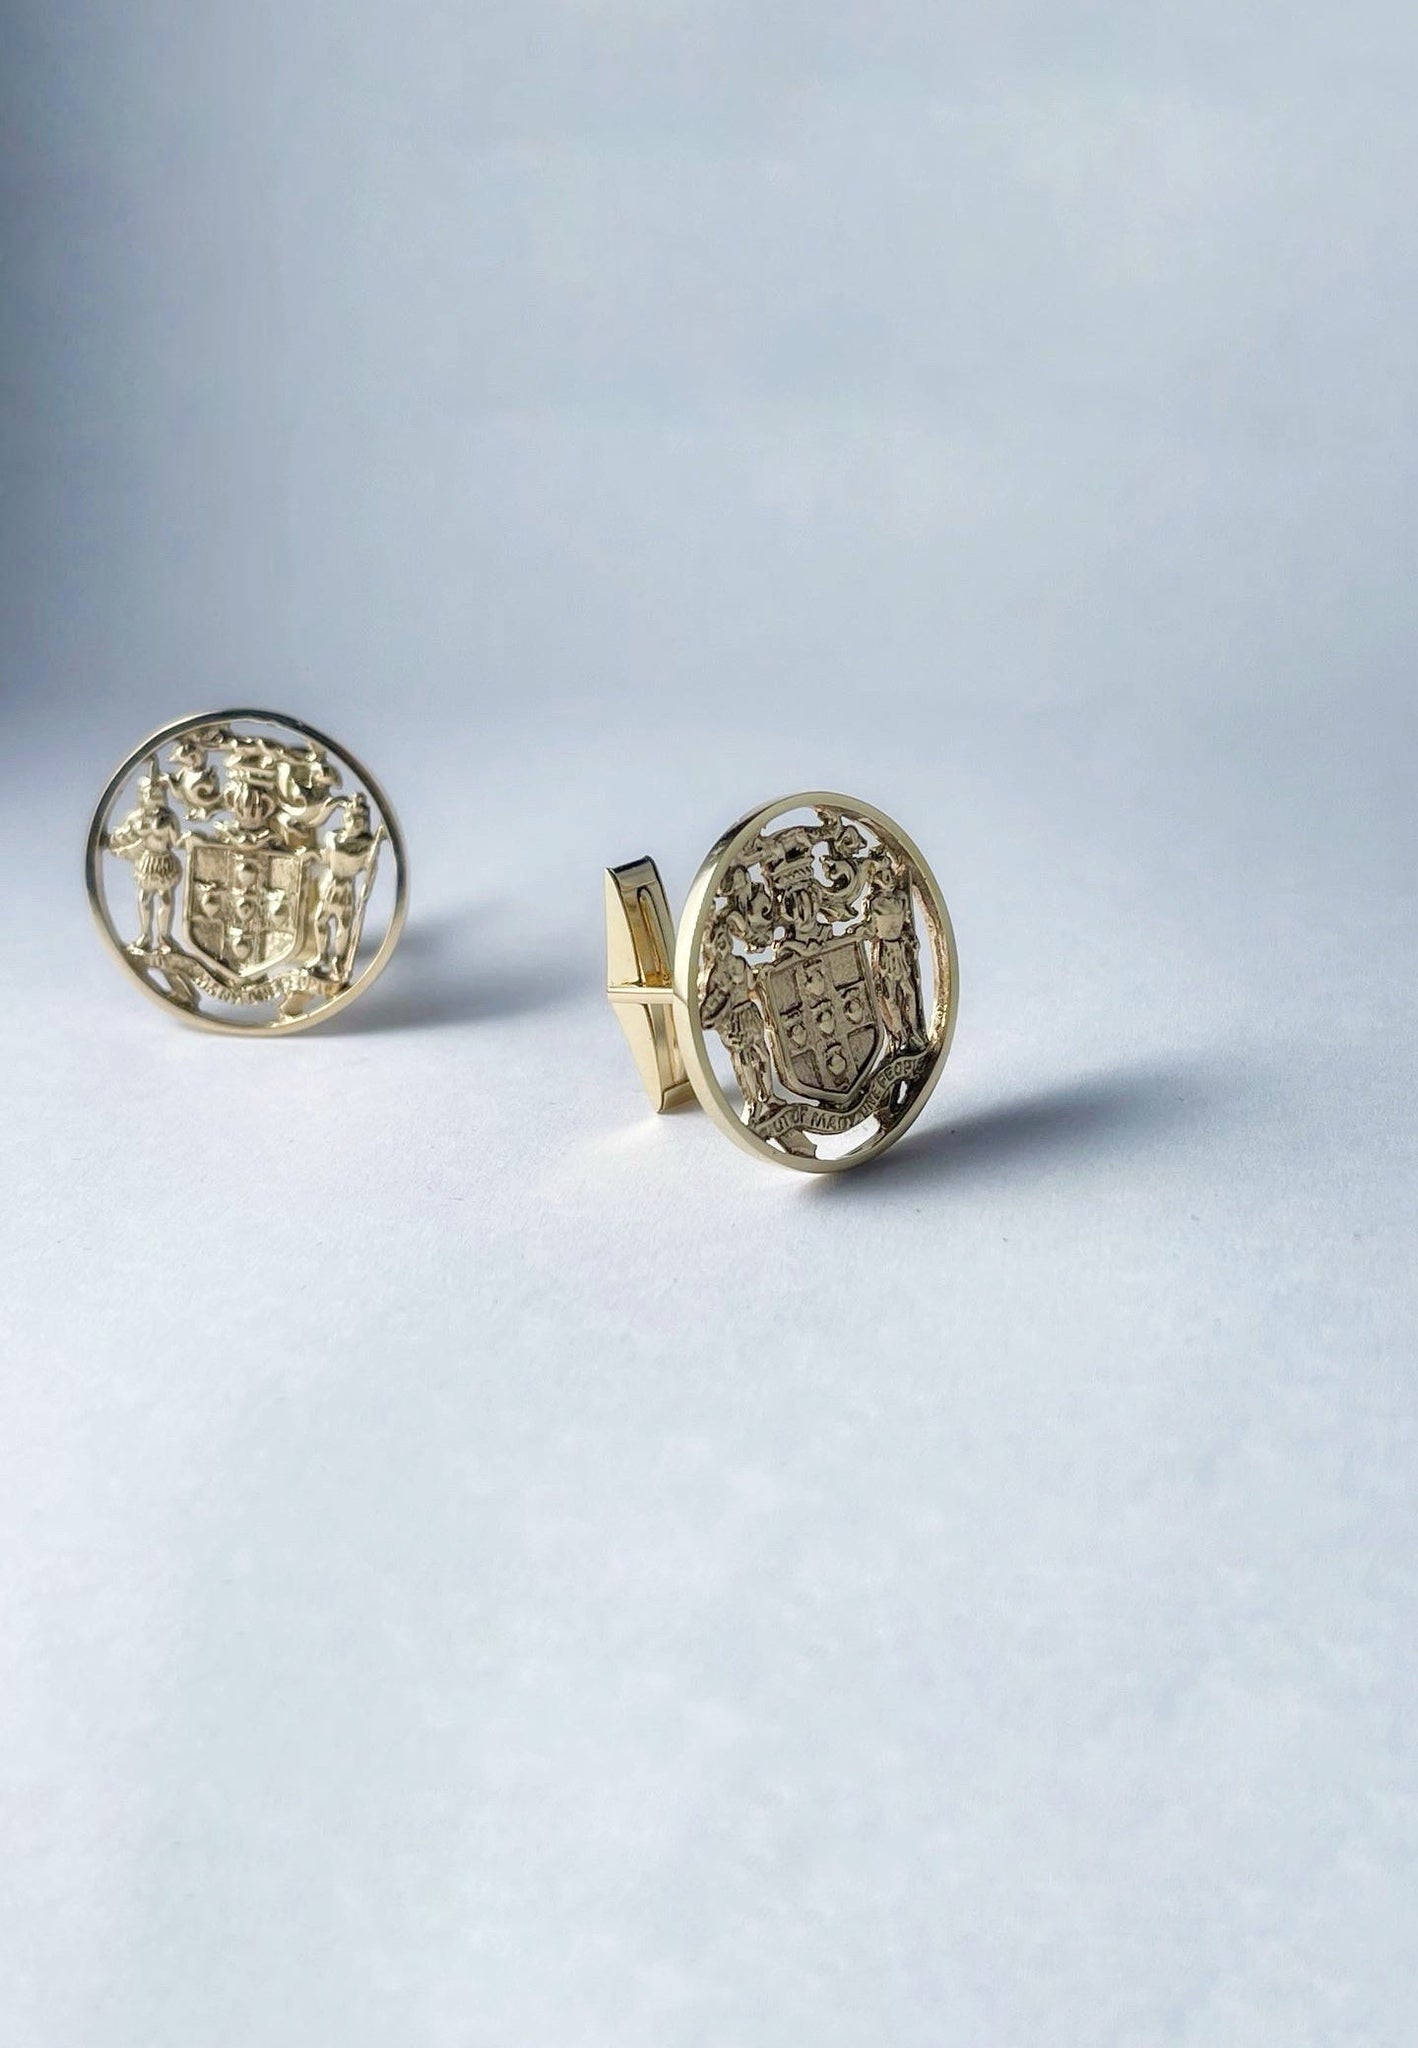 THE JAMAICAN COAT OF ARMS CUFFLINKS